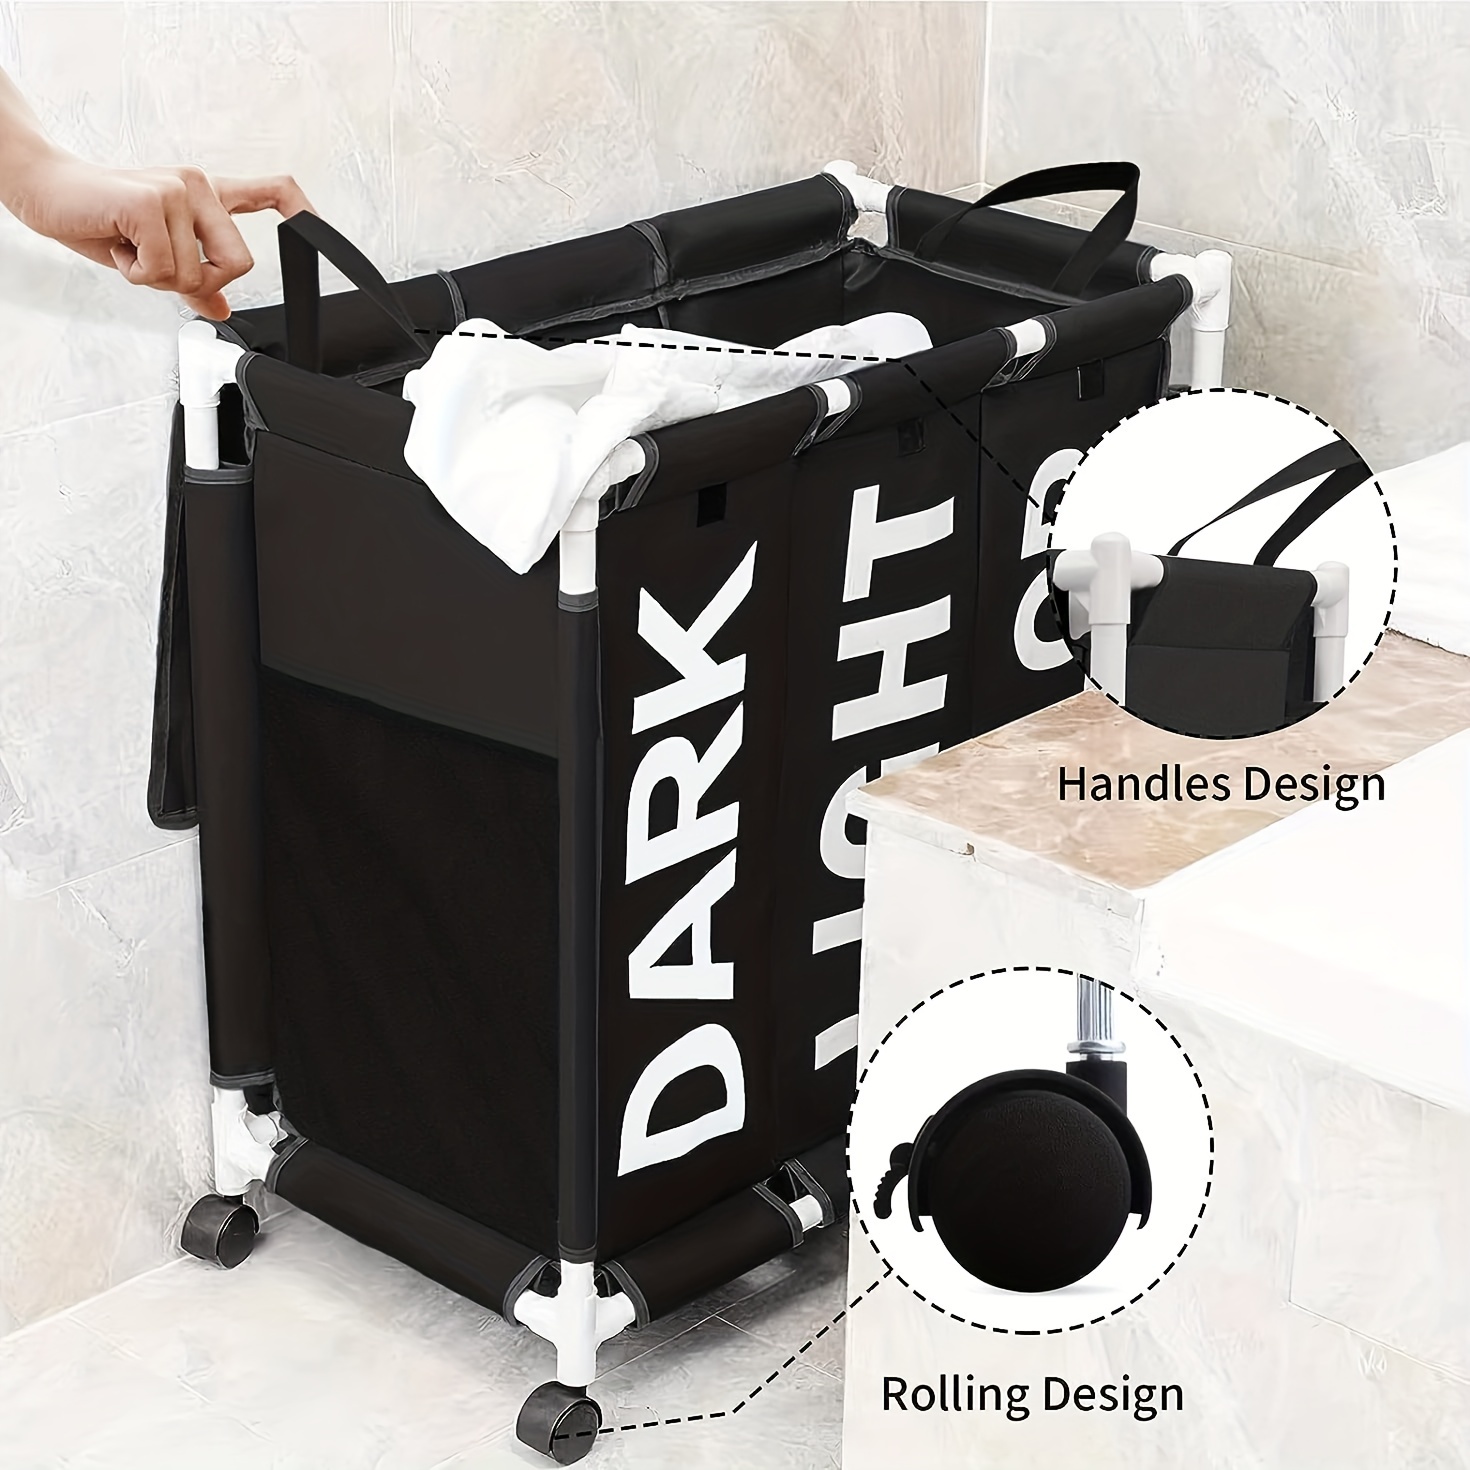 DOKEHOM 27.5-inches Slim Laundry Basket with Removable Wash Bag on Wheels (4 Colors), Foldable Corner Storage Bins, Collapsible Rolling Laundry Hamper